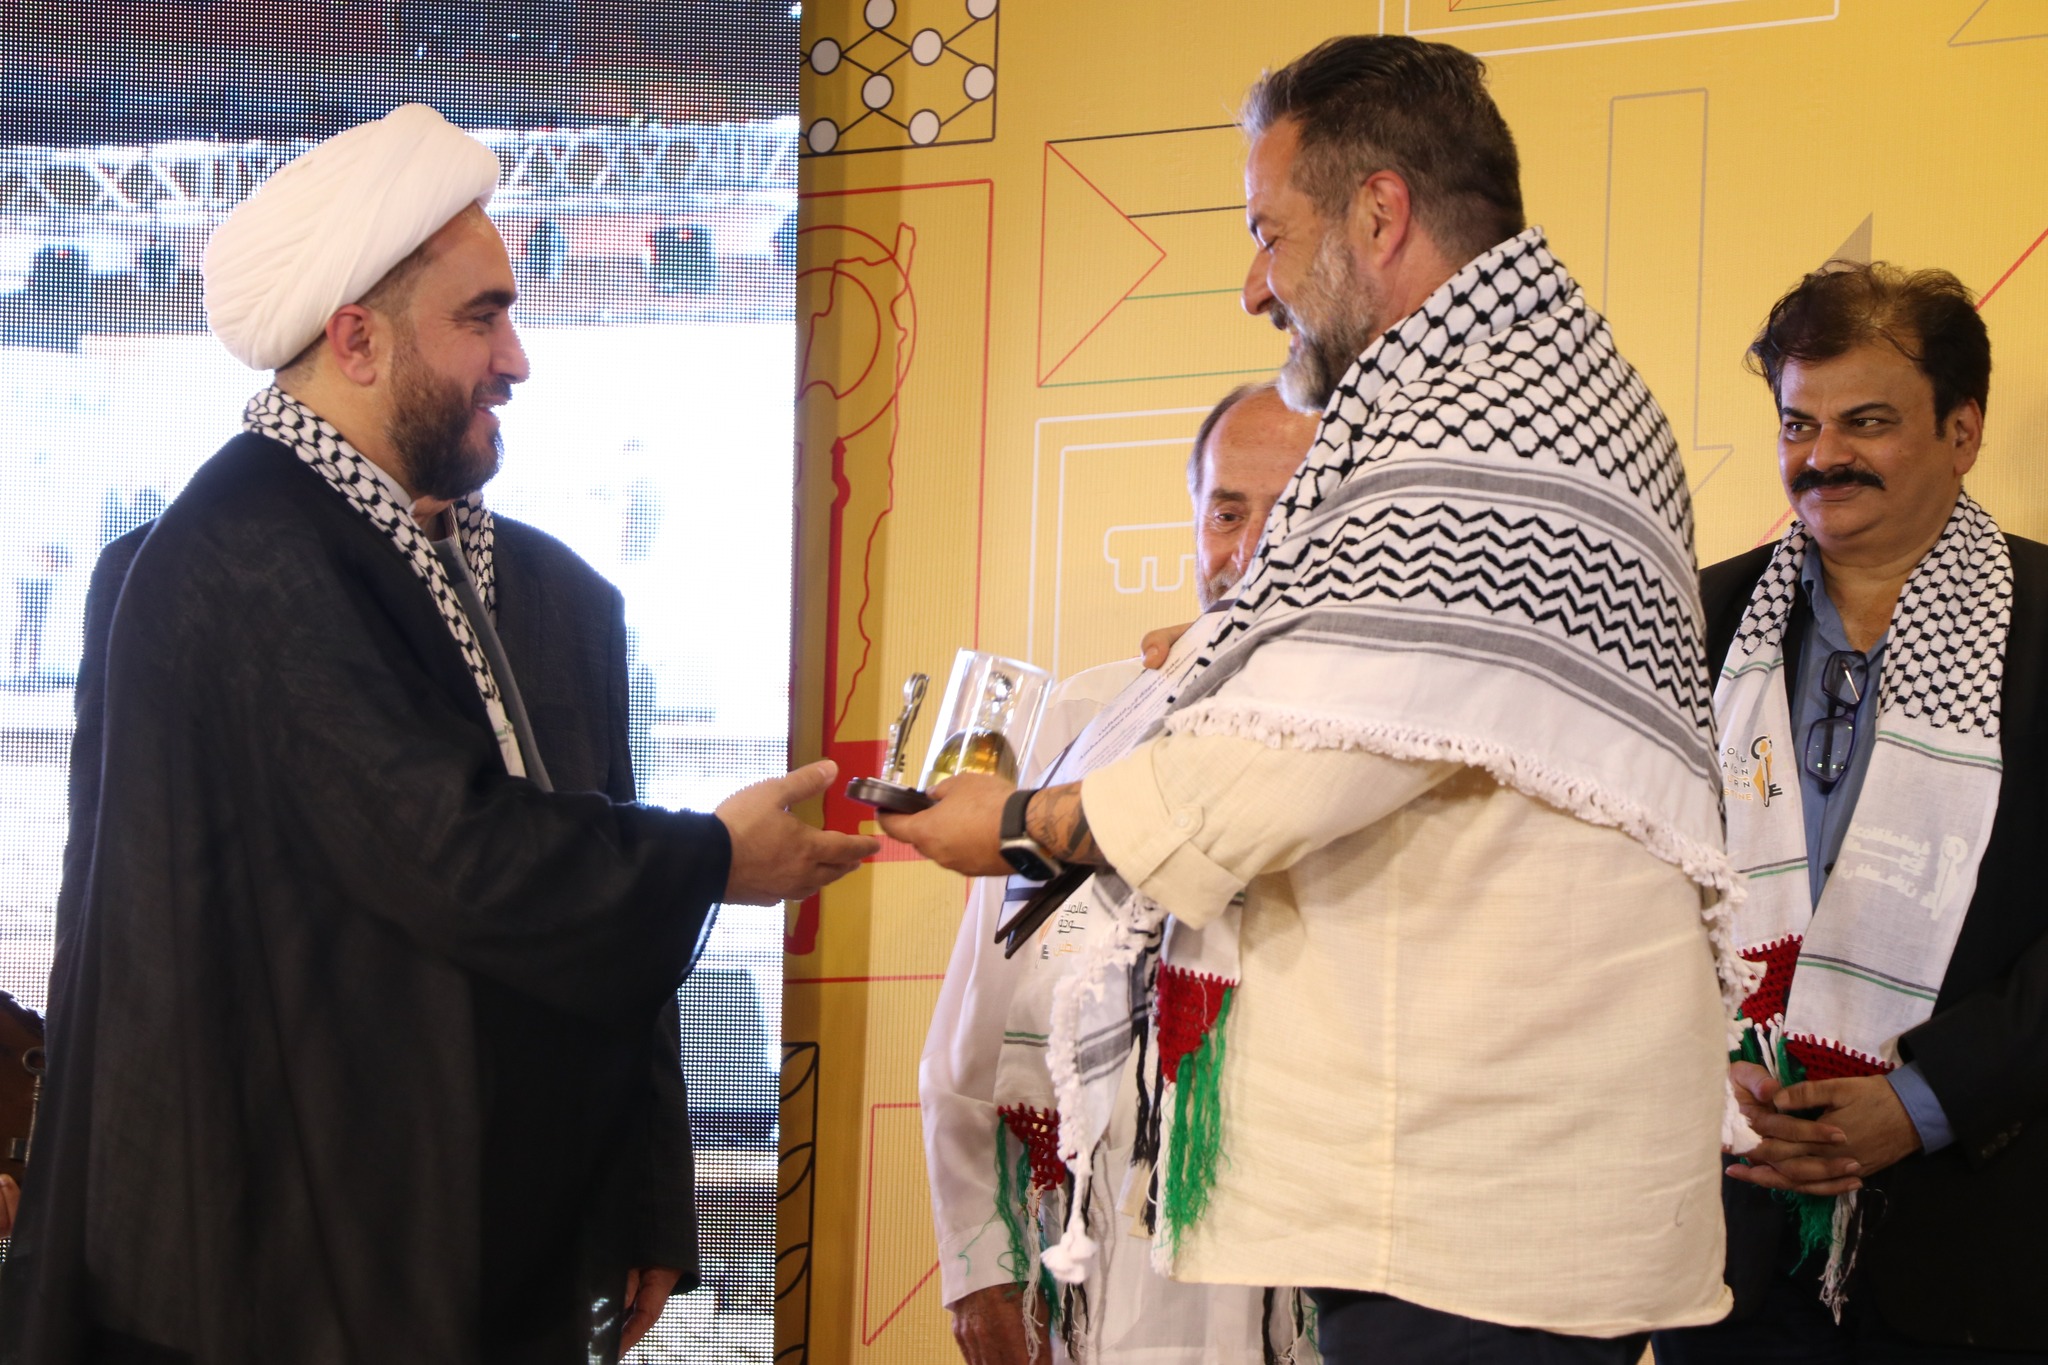 Spanish Member of the European Parliament receives an award from Hezbollah-affiliated organization in Beirut